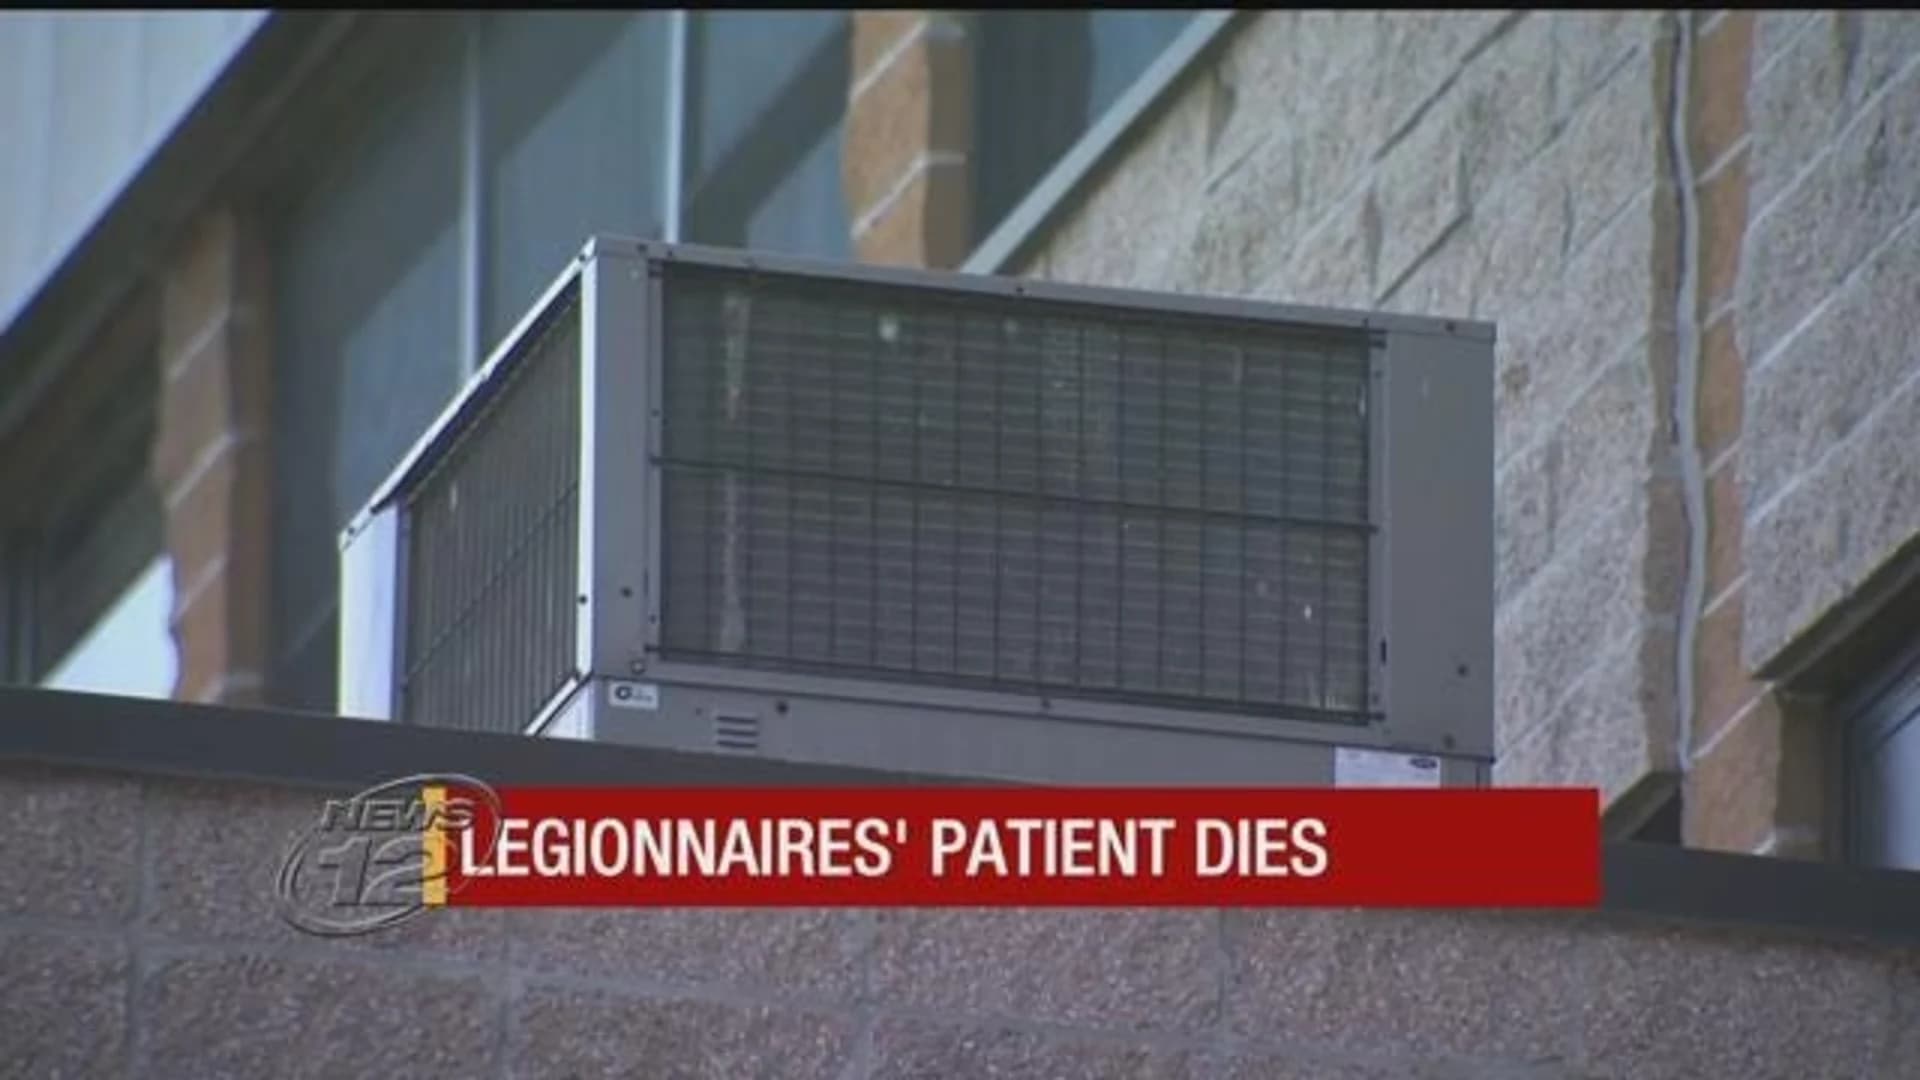 Woman who contracted Legionnaires’ at nursing home dies